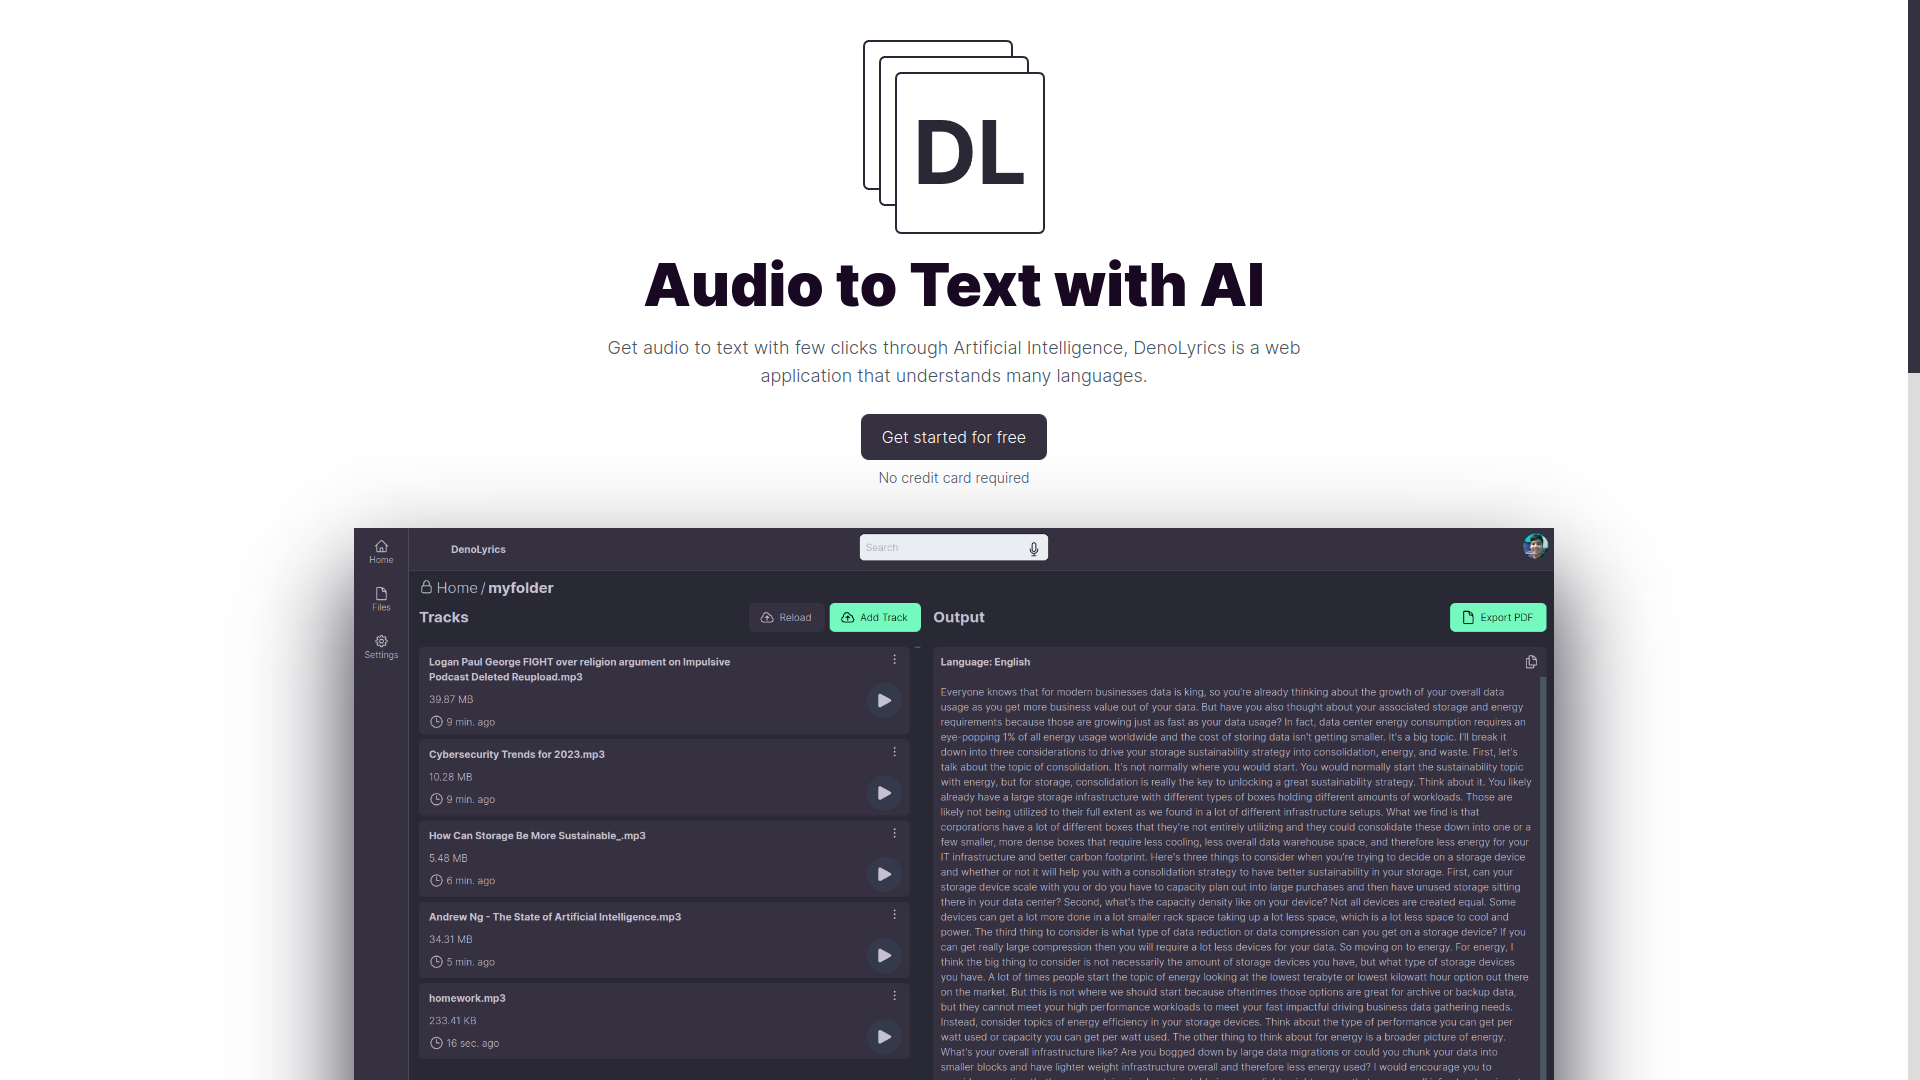 DenoLyrics - A tool to transcribe audio into text in over 50 languages